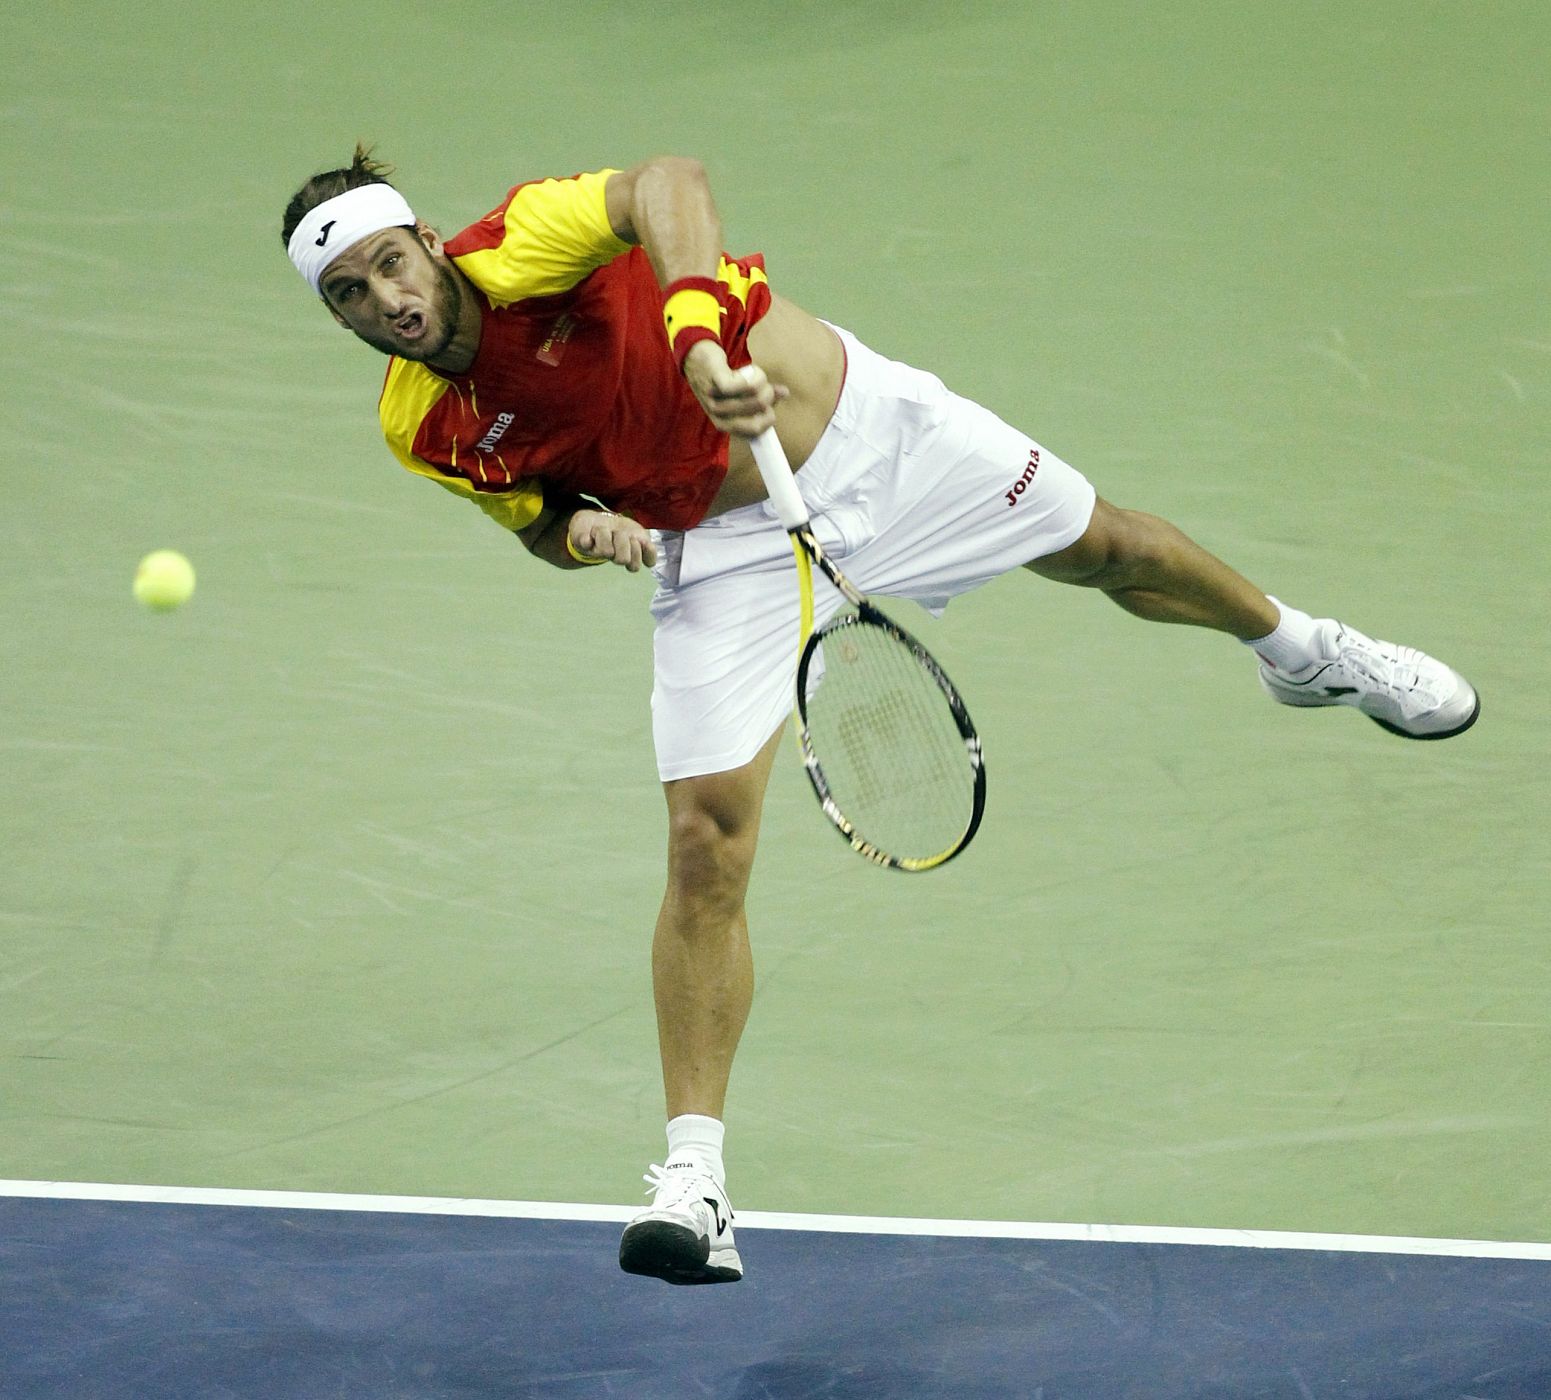 Lopez of Spain serves against Fish of the U.S. during their singles Davis Cup tennis match in Austin, Texas